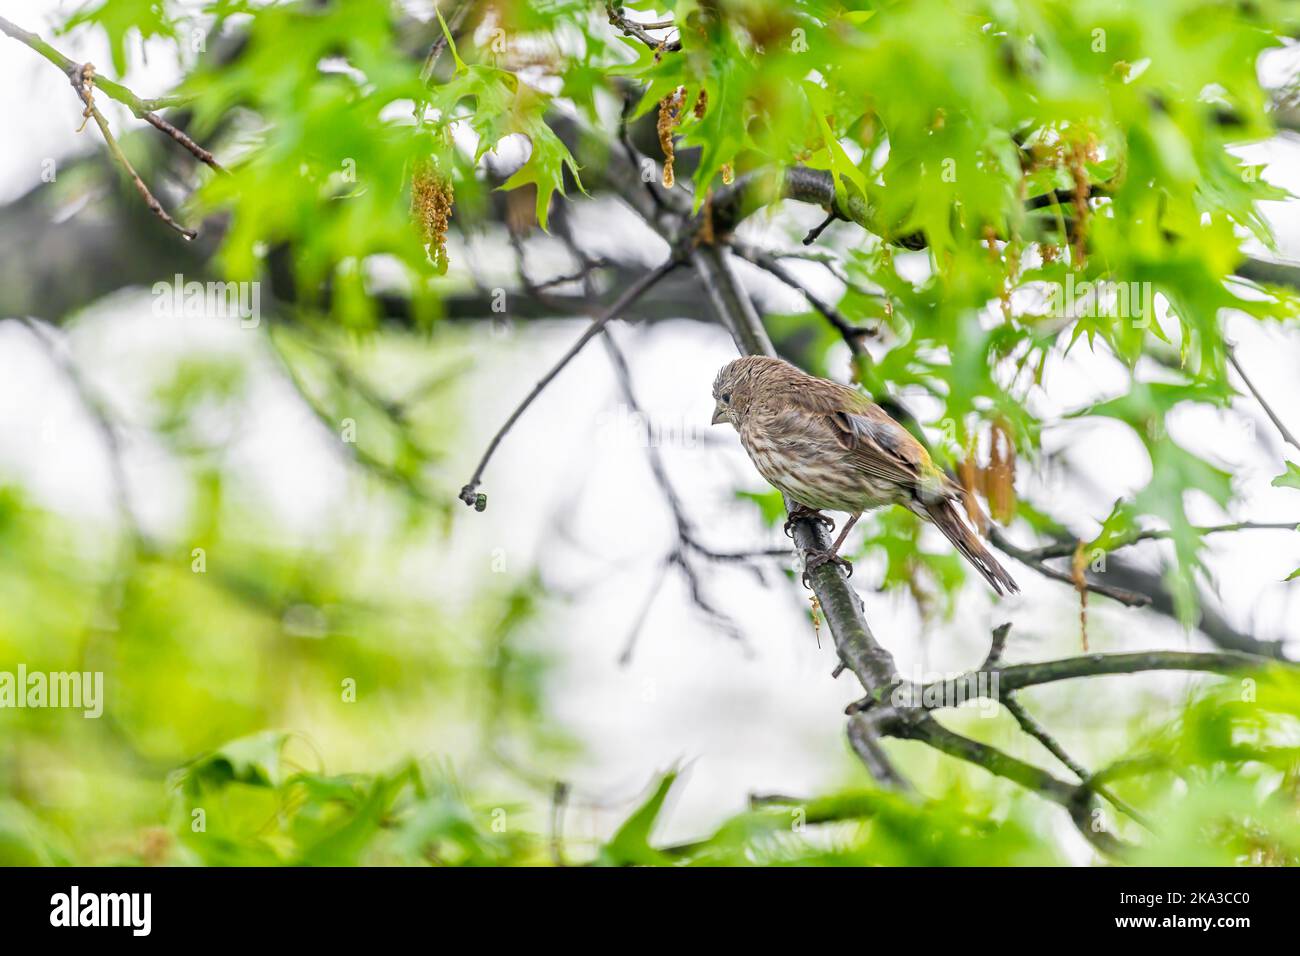 Green oak tree with female house finch bird with striped brown color and bokeh background in Virginia perched on branch in spring Stock Photo